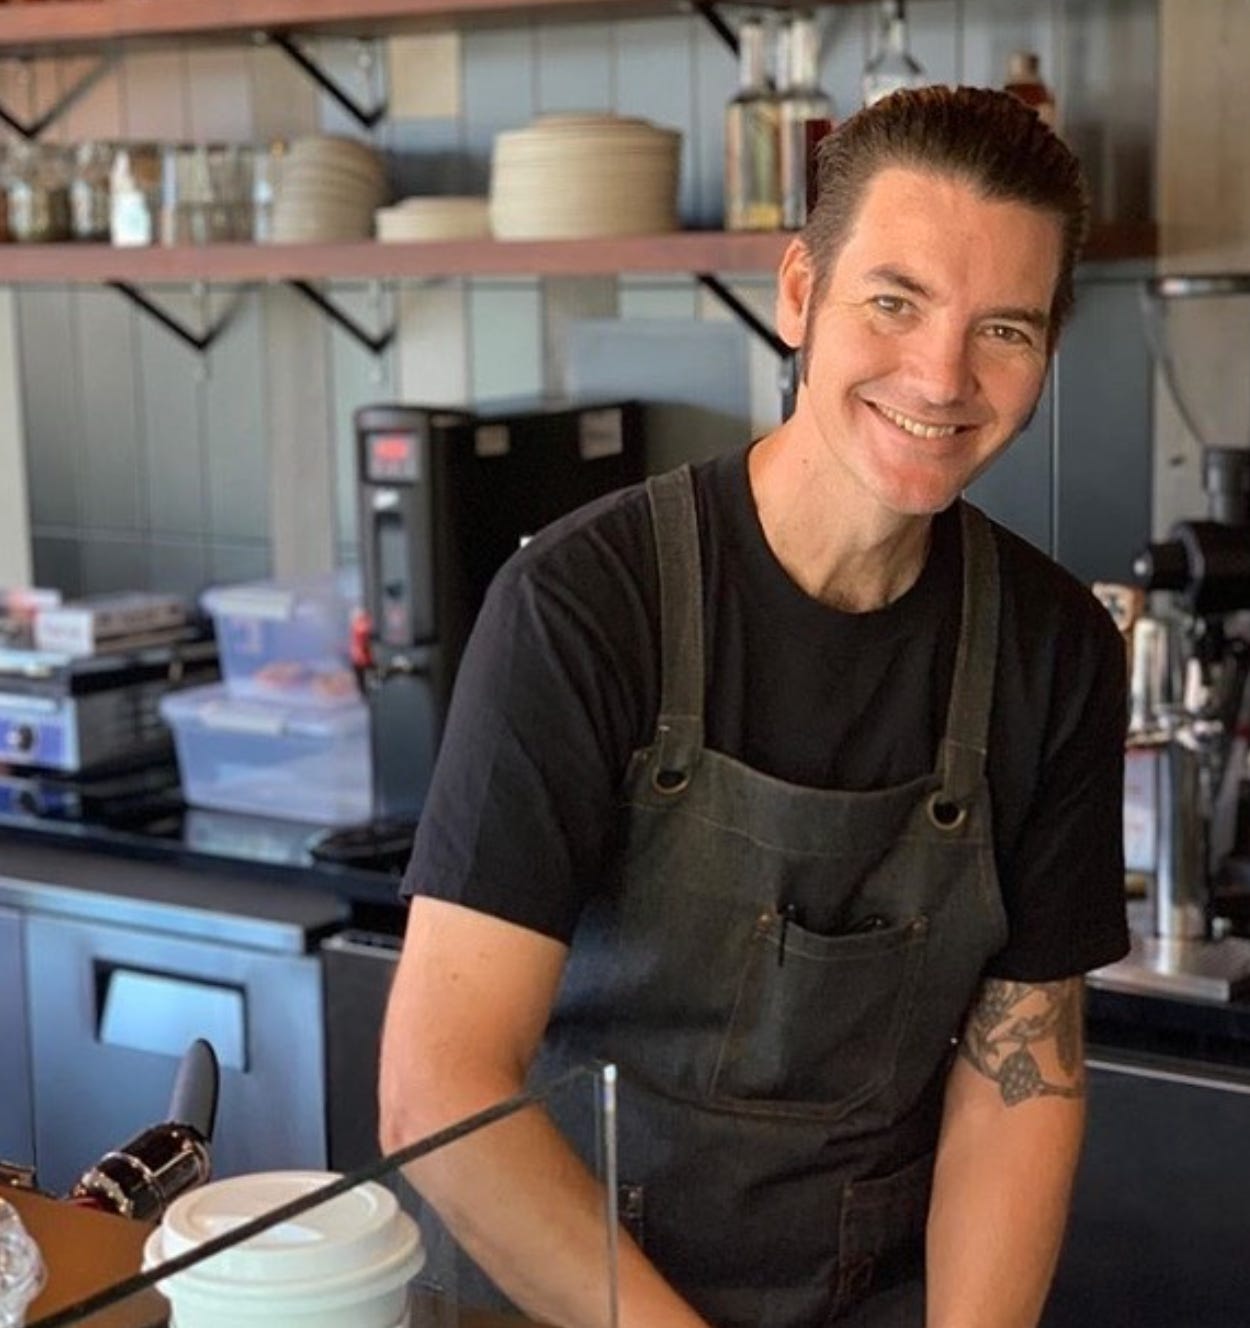 A tall, white barista with black hair slicked back wearing a white shirt and denim apron making a coffee drink and smiling at the camera.